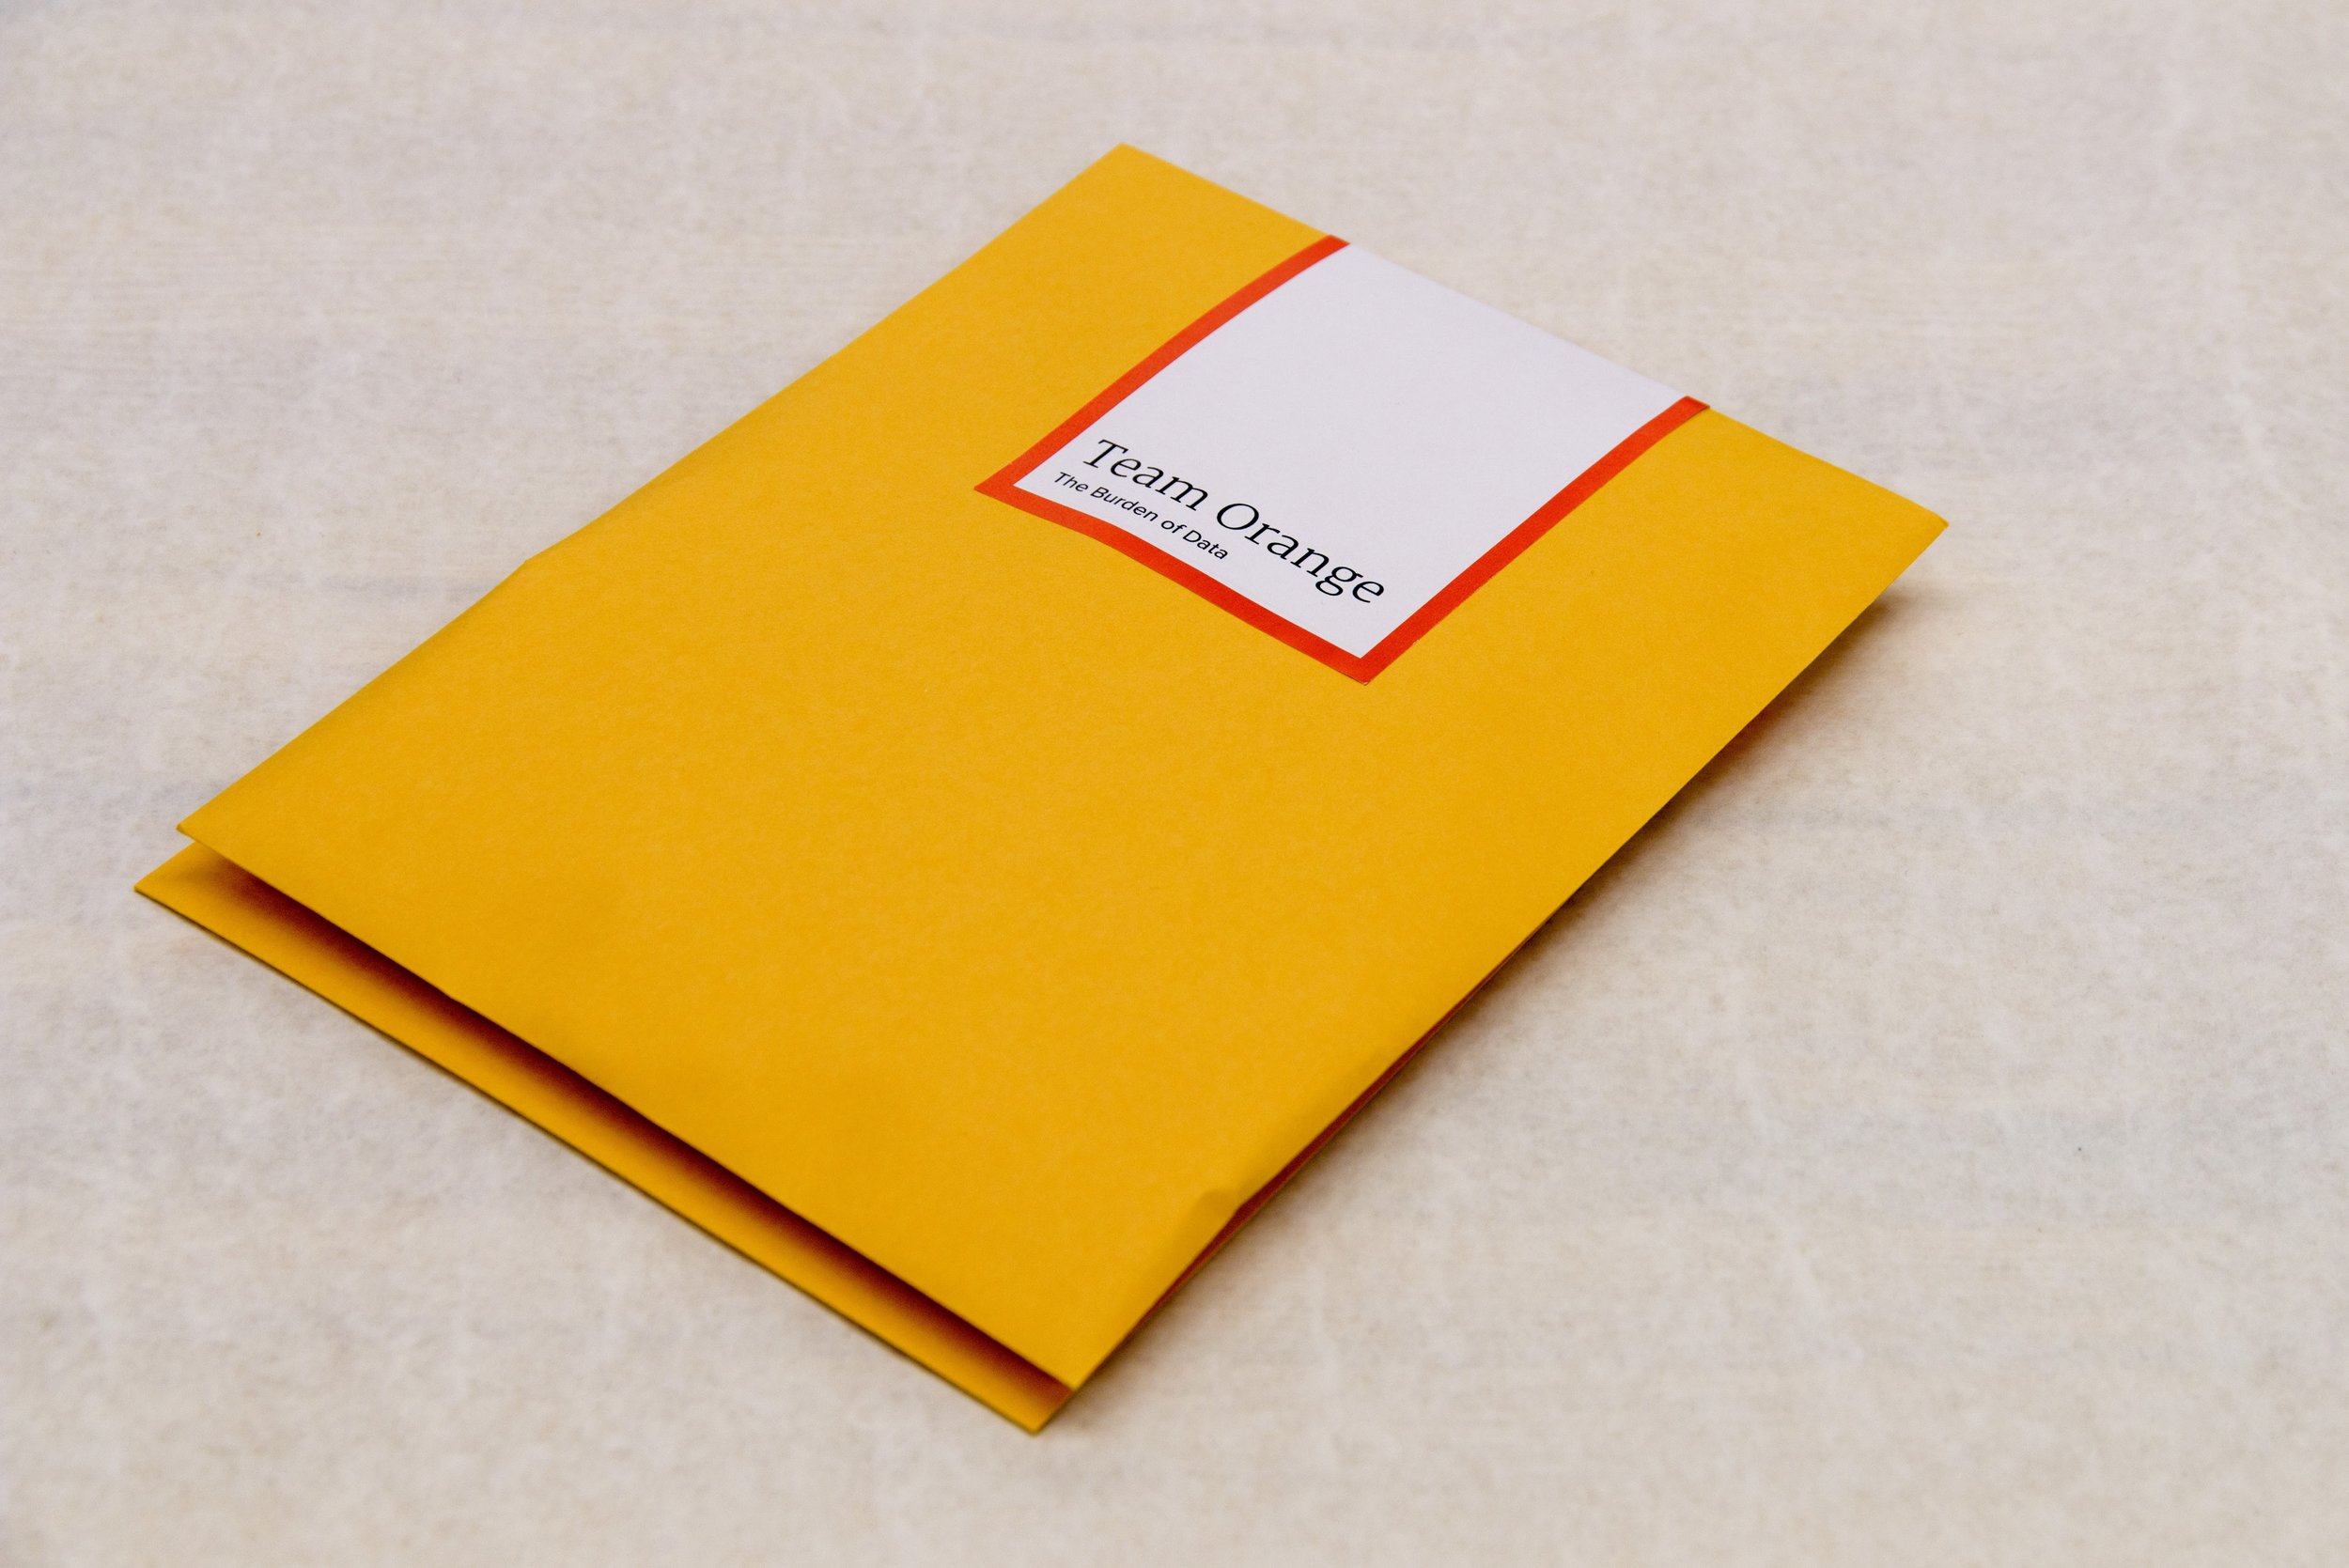 Small teams received envelopes with a different case to review.